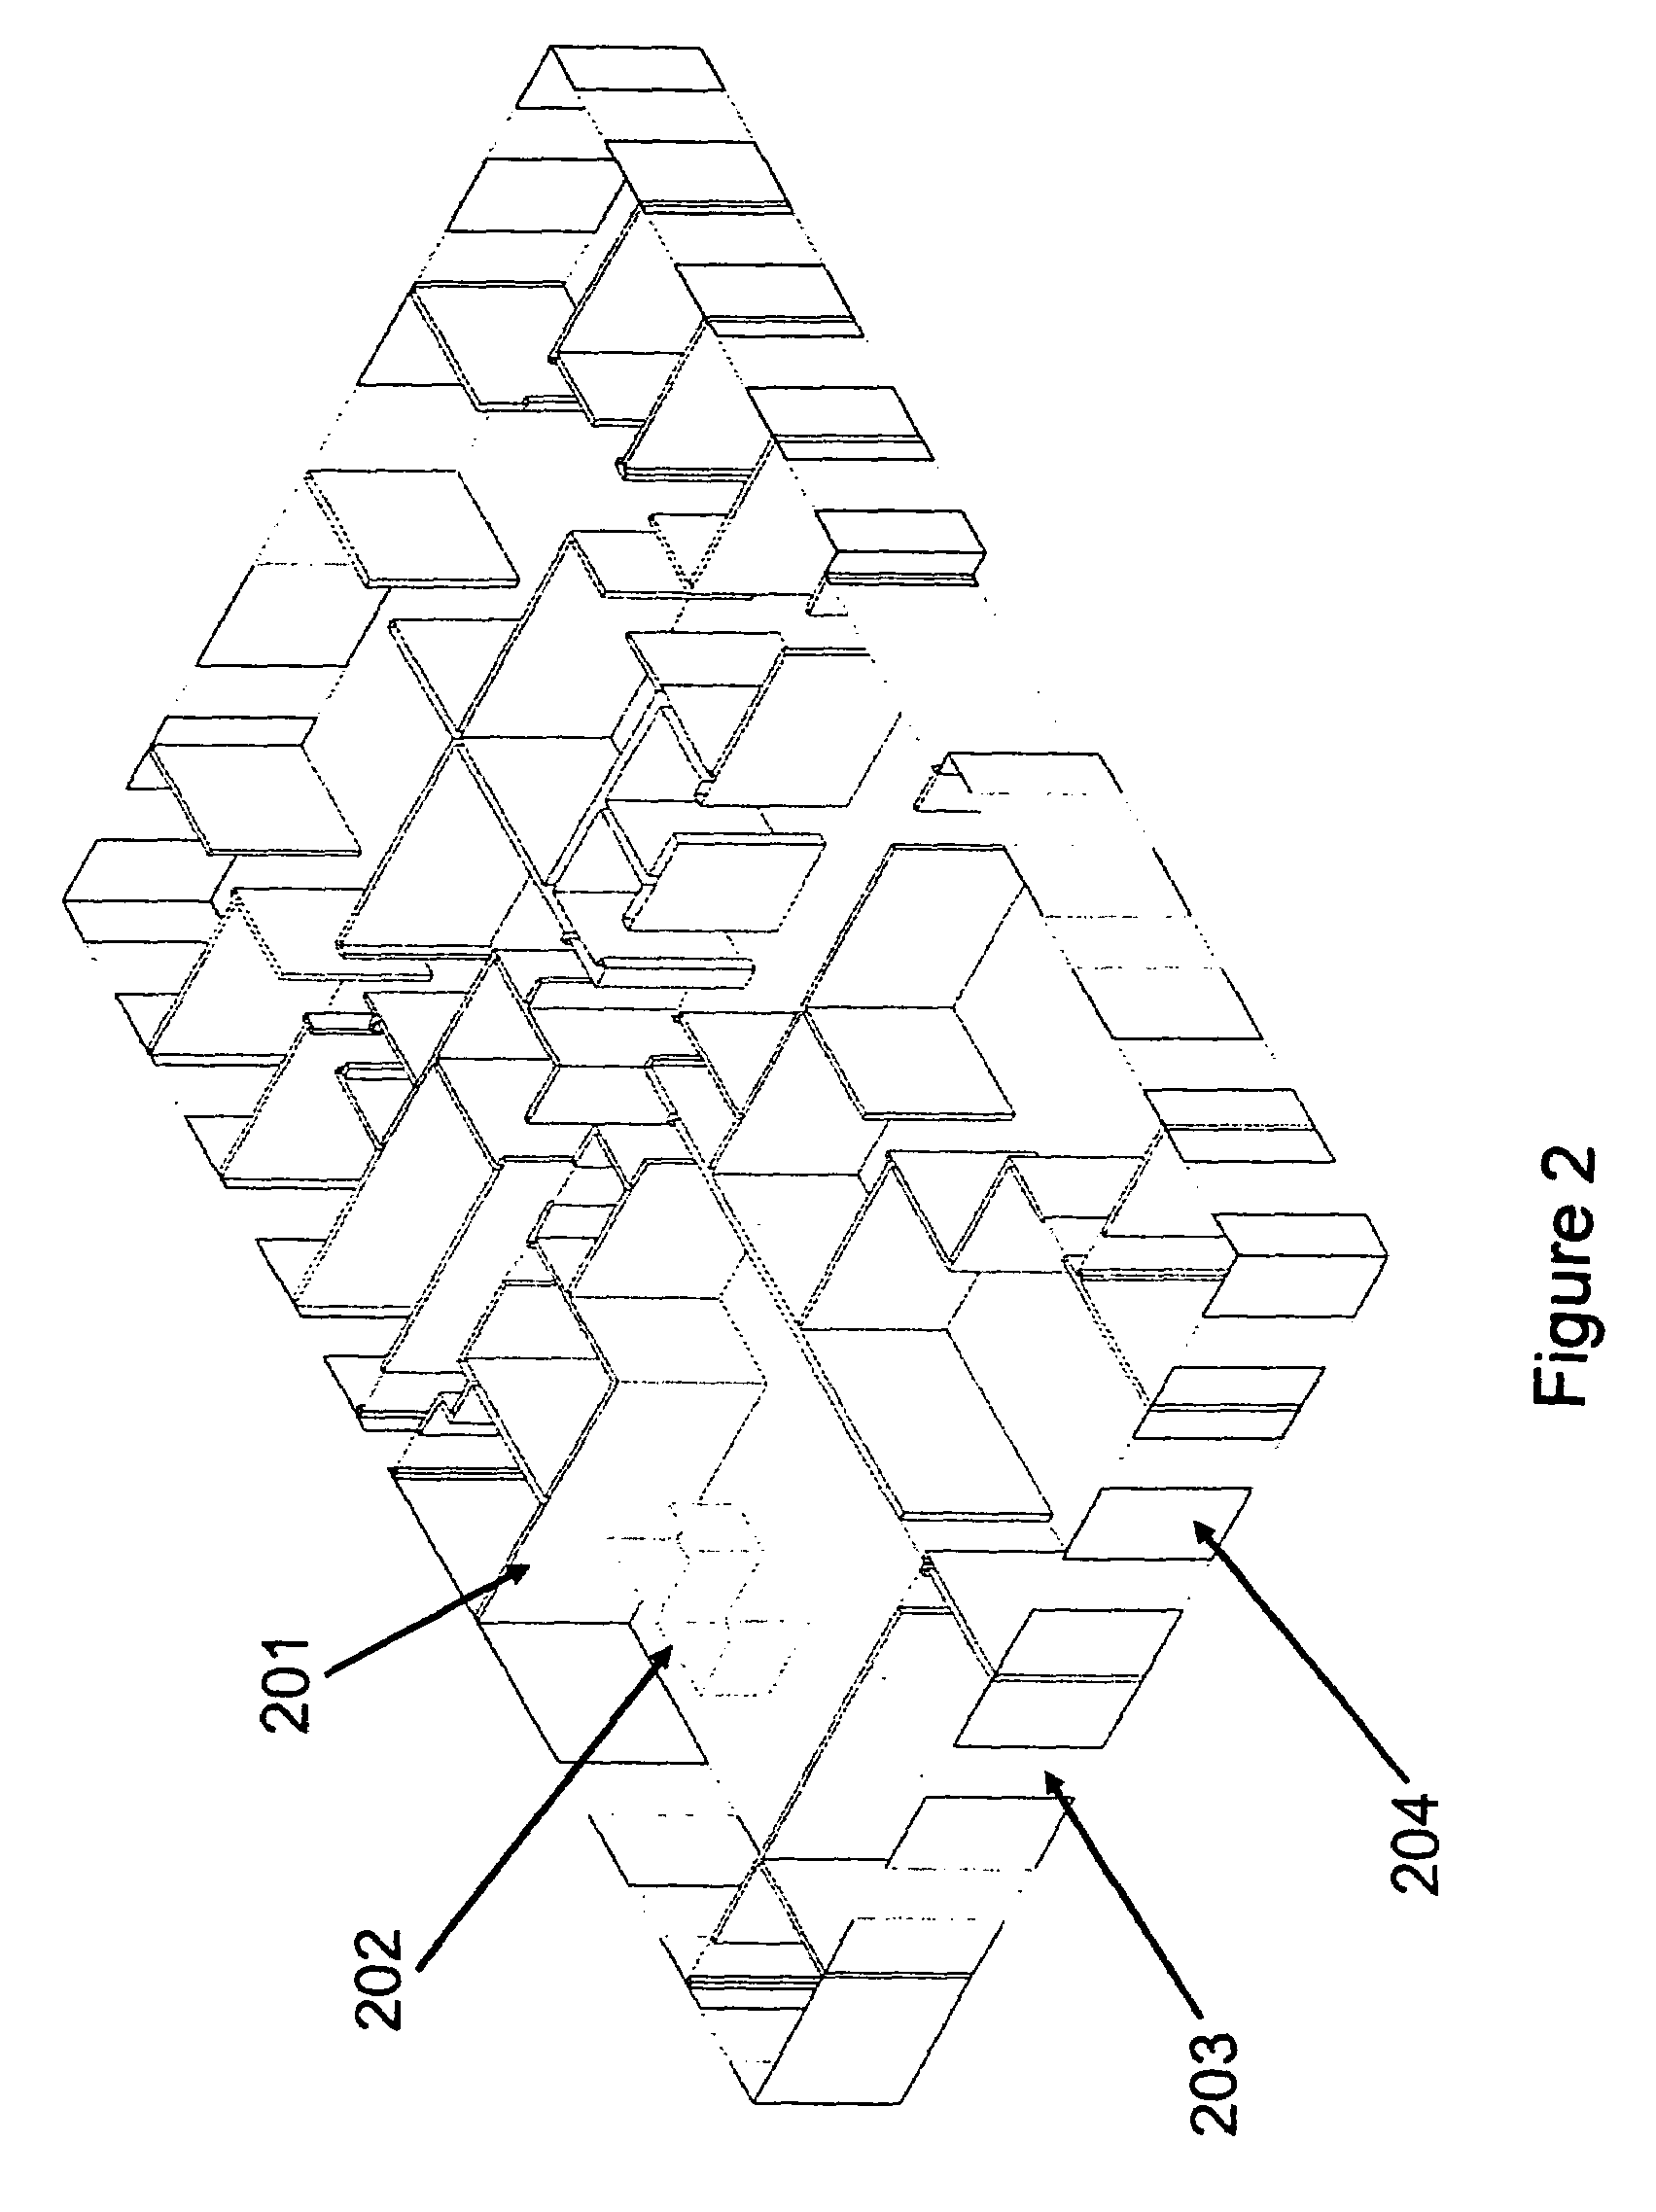 System and method for indicating the presence or physical location of persons or devices in a site specific representation of a physical environment